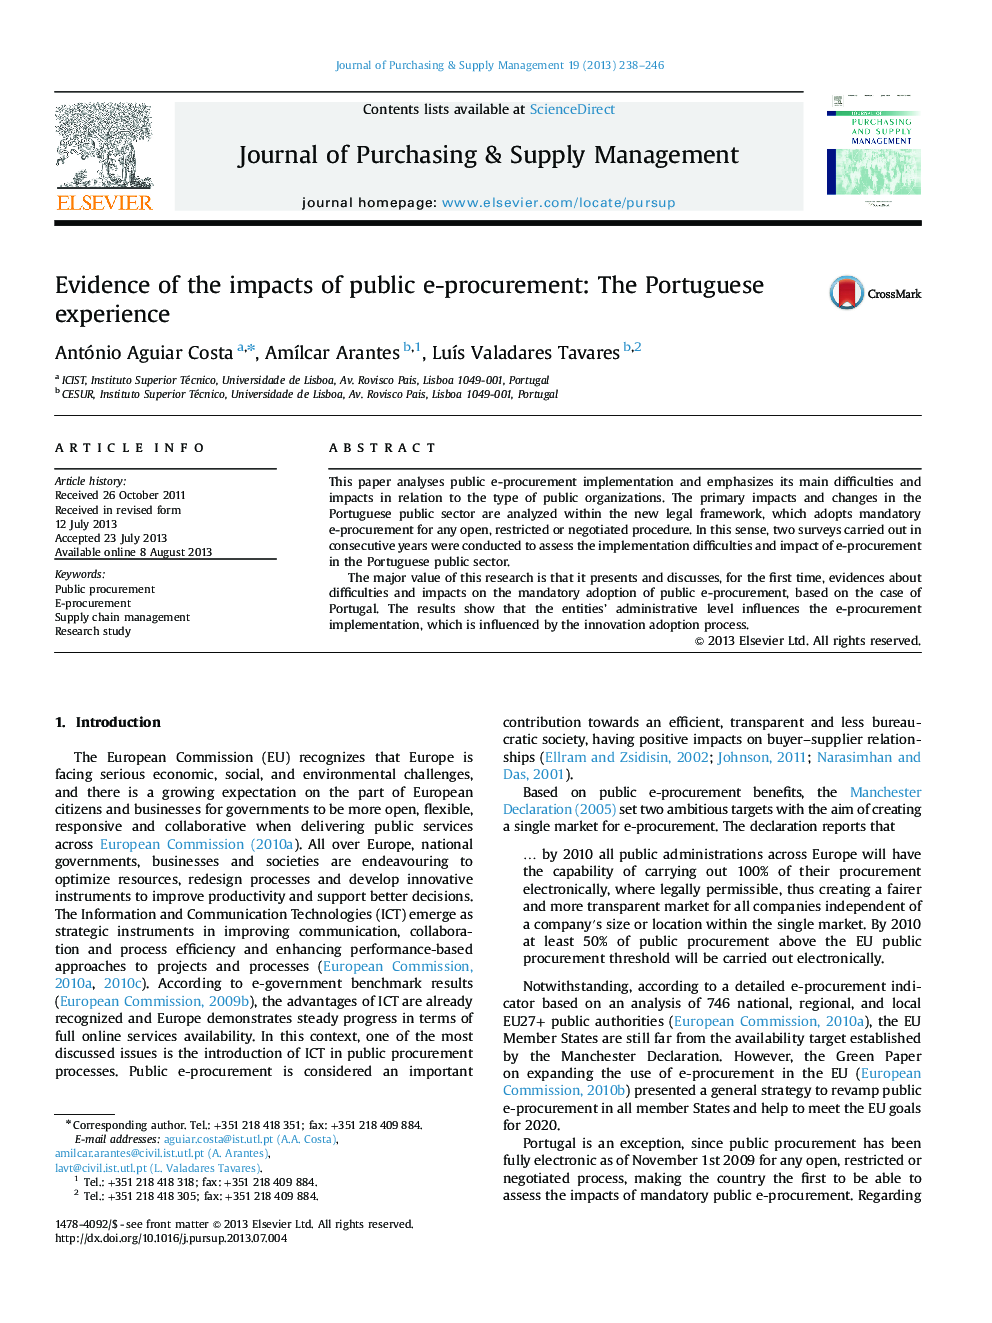 Evidence of the impacts of public e-procurement: The Portuguese experience